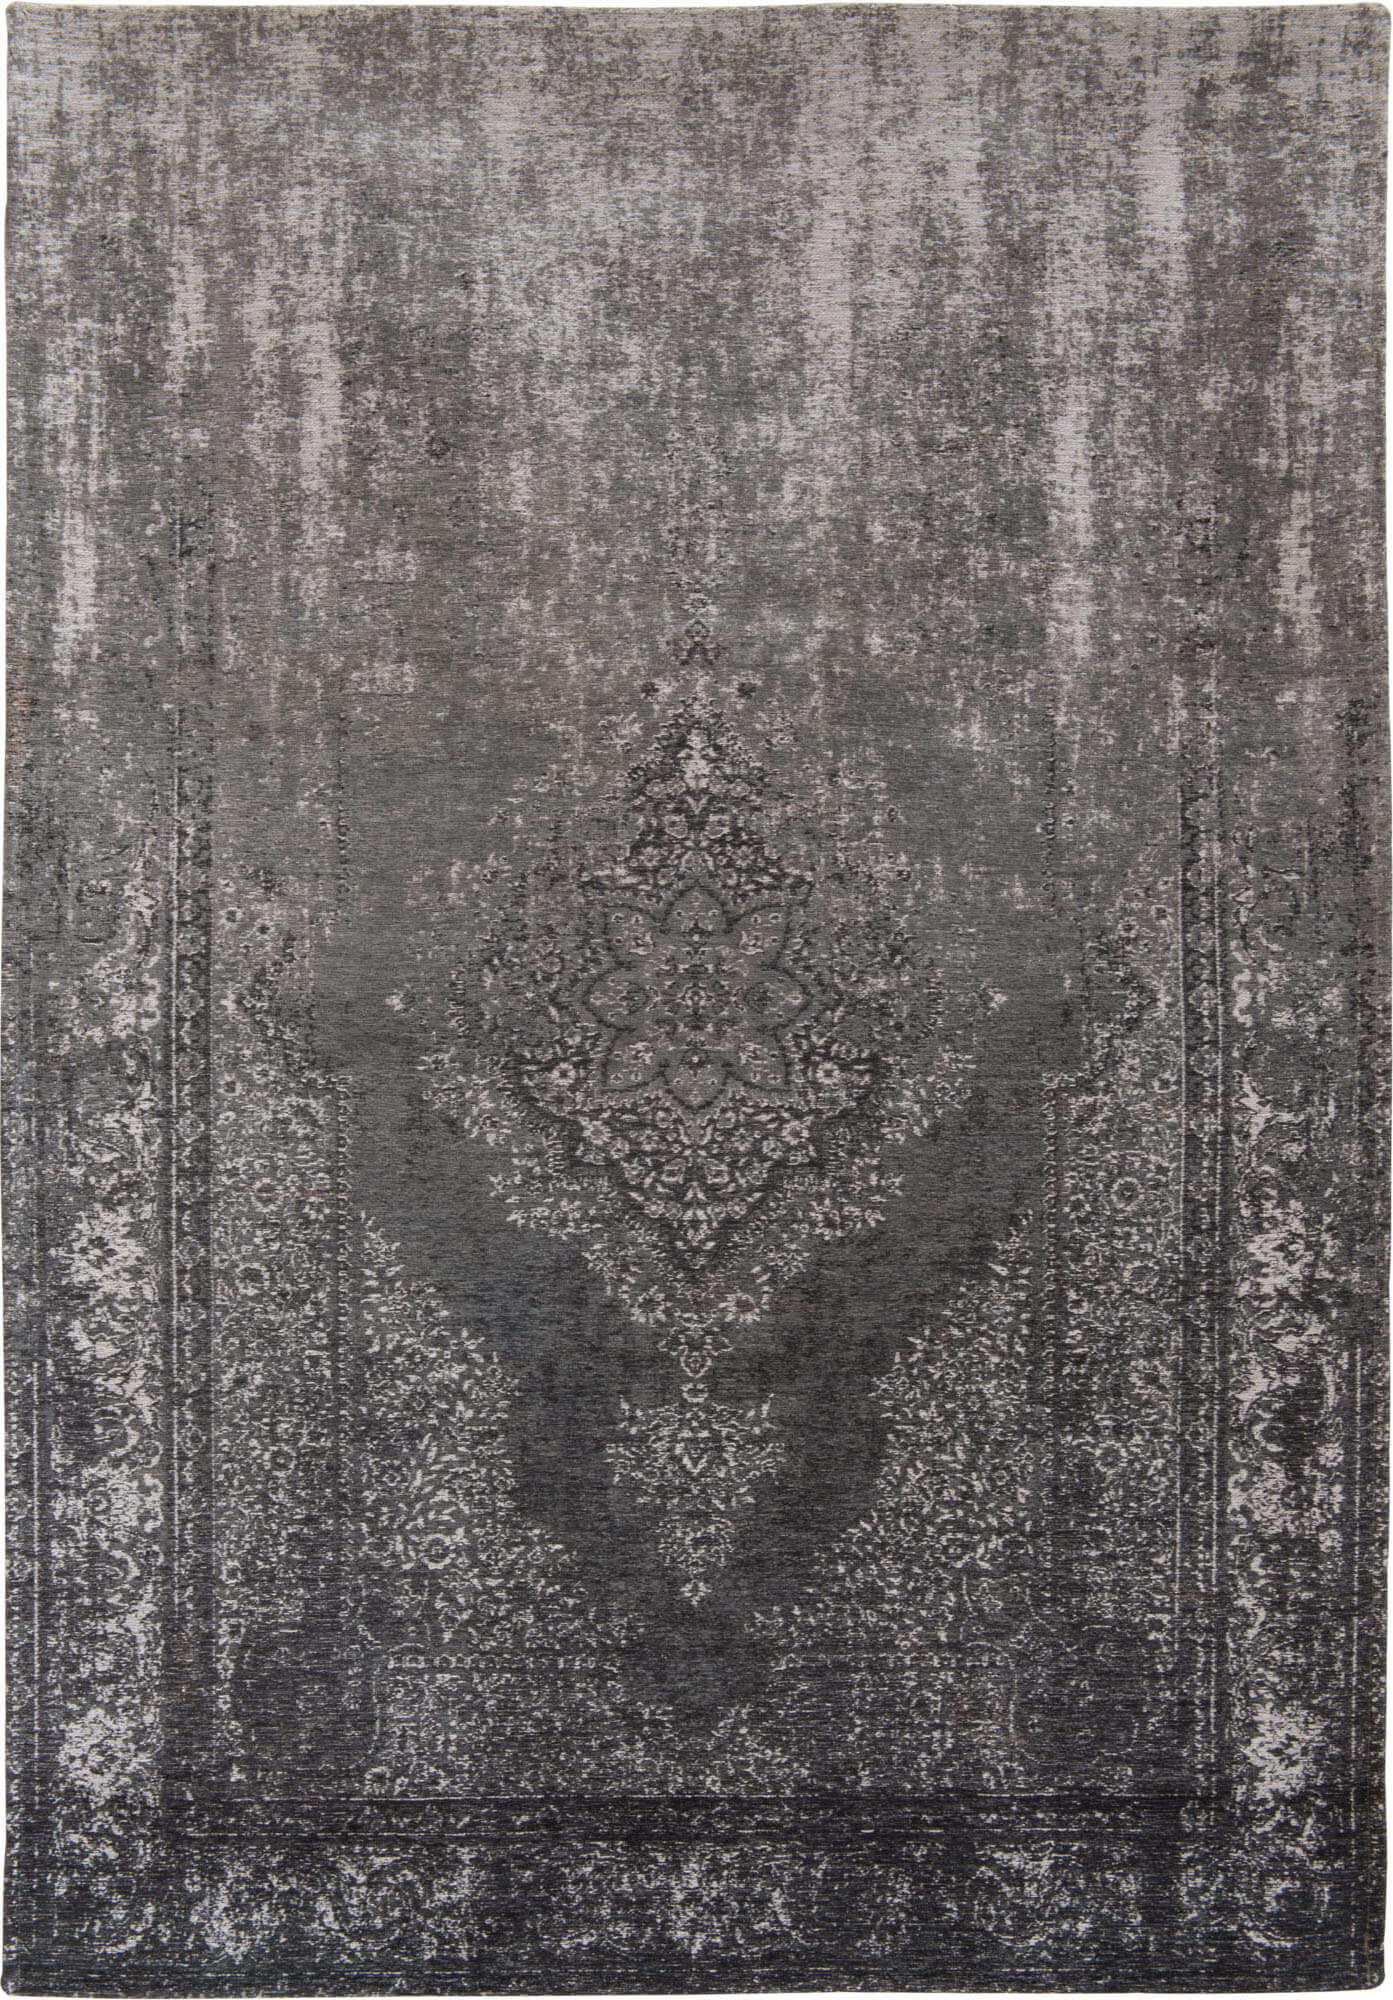 Persian Vintage Style Rug Grey Neutral ☞ Size: 140 x 200 cm